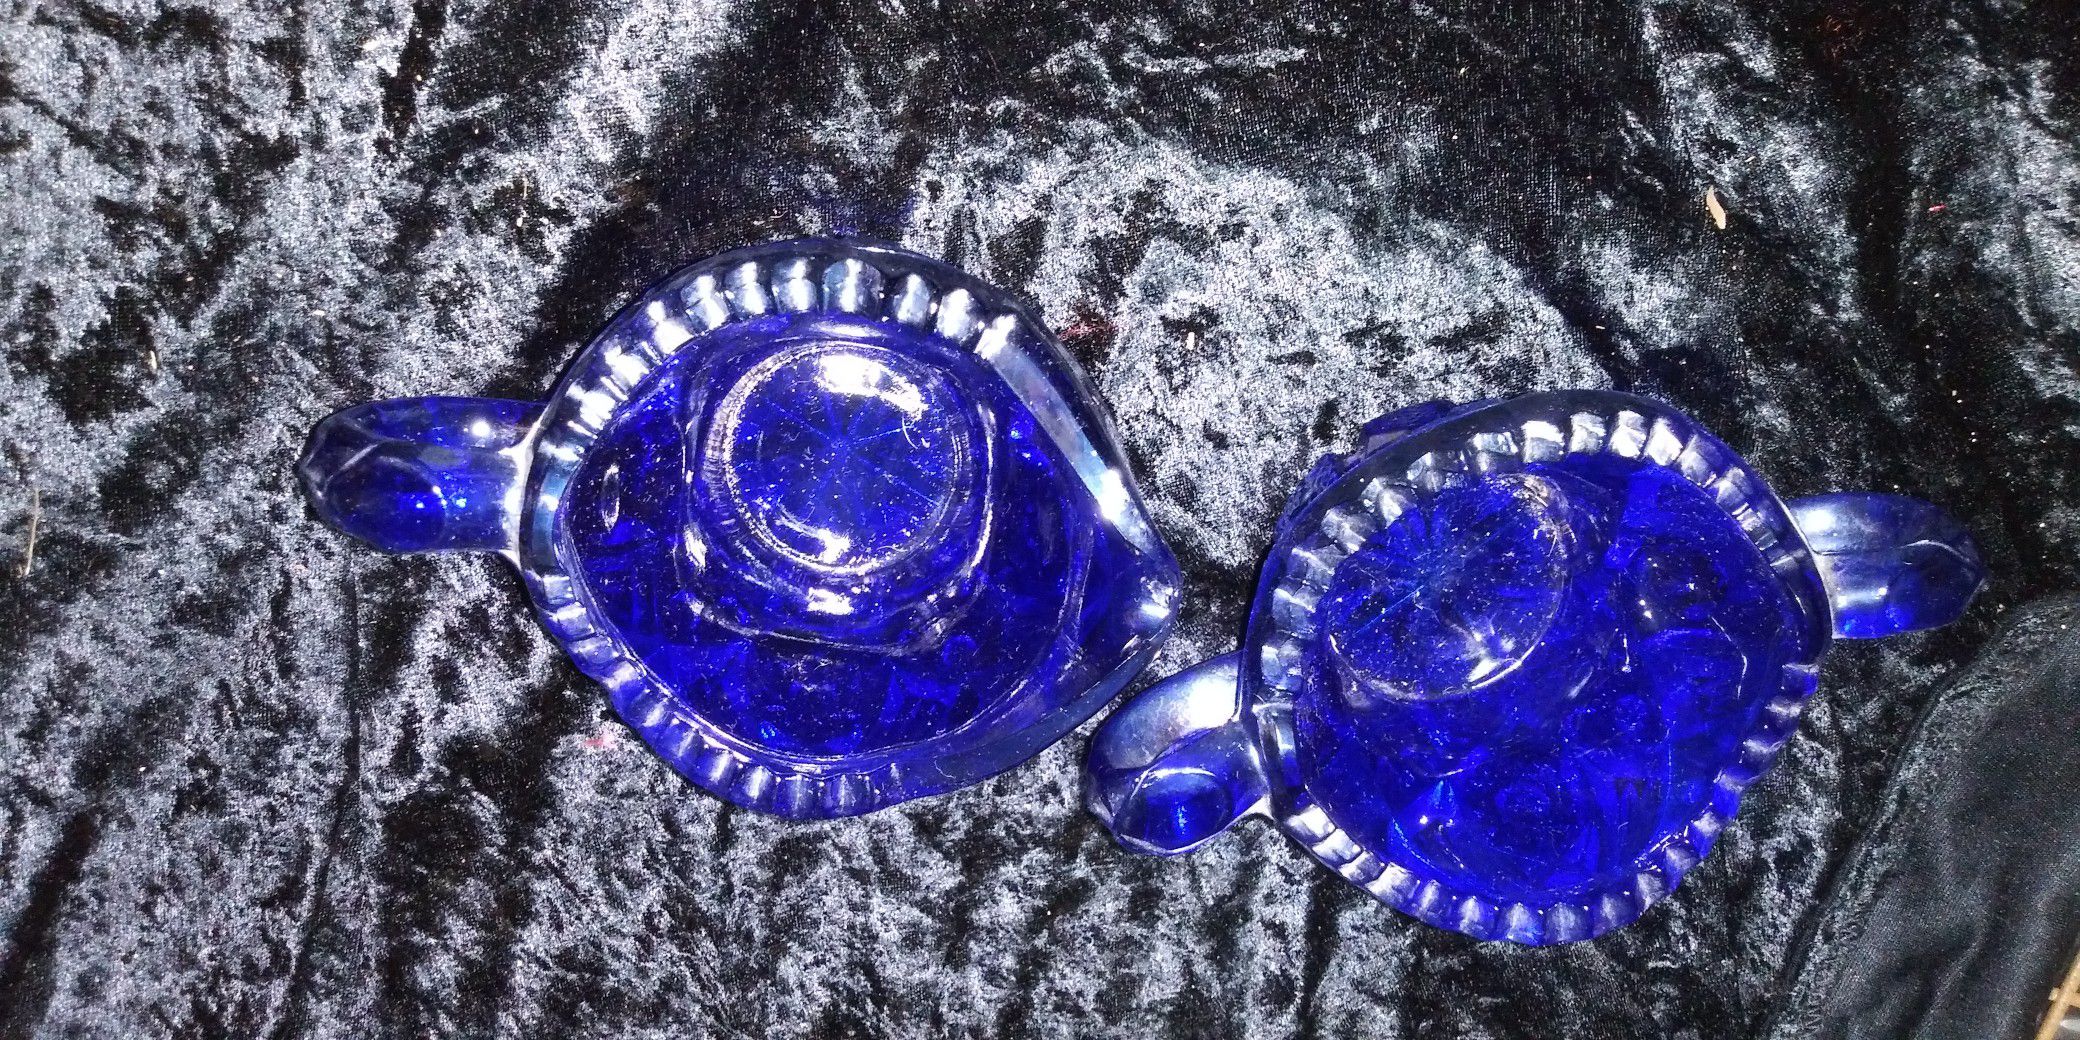 VintageCarnival Glass Creamer and Sugar containers